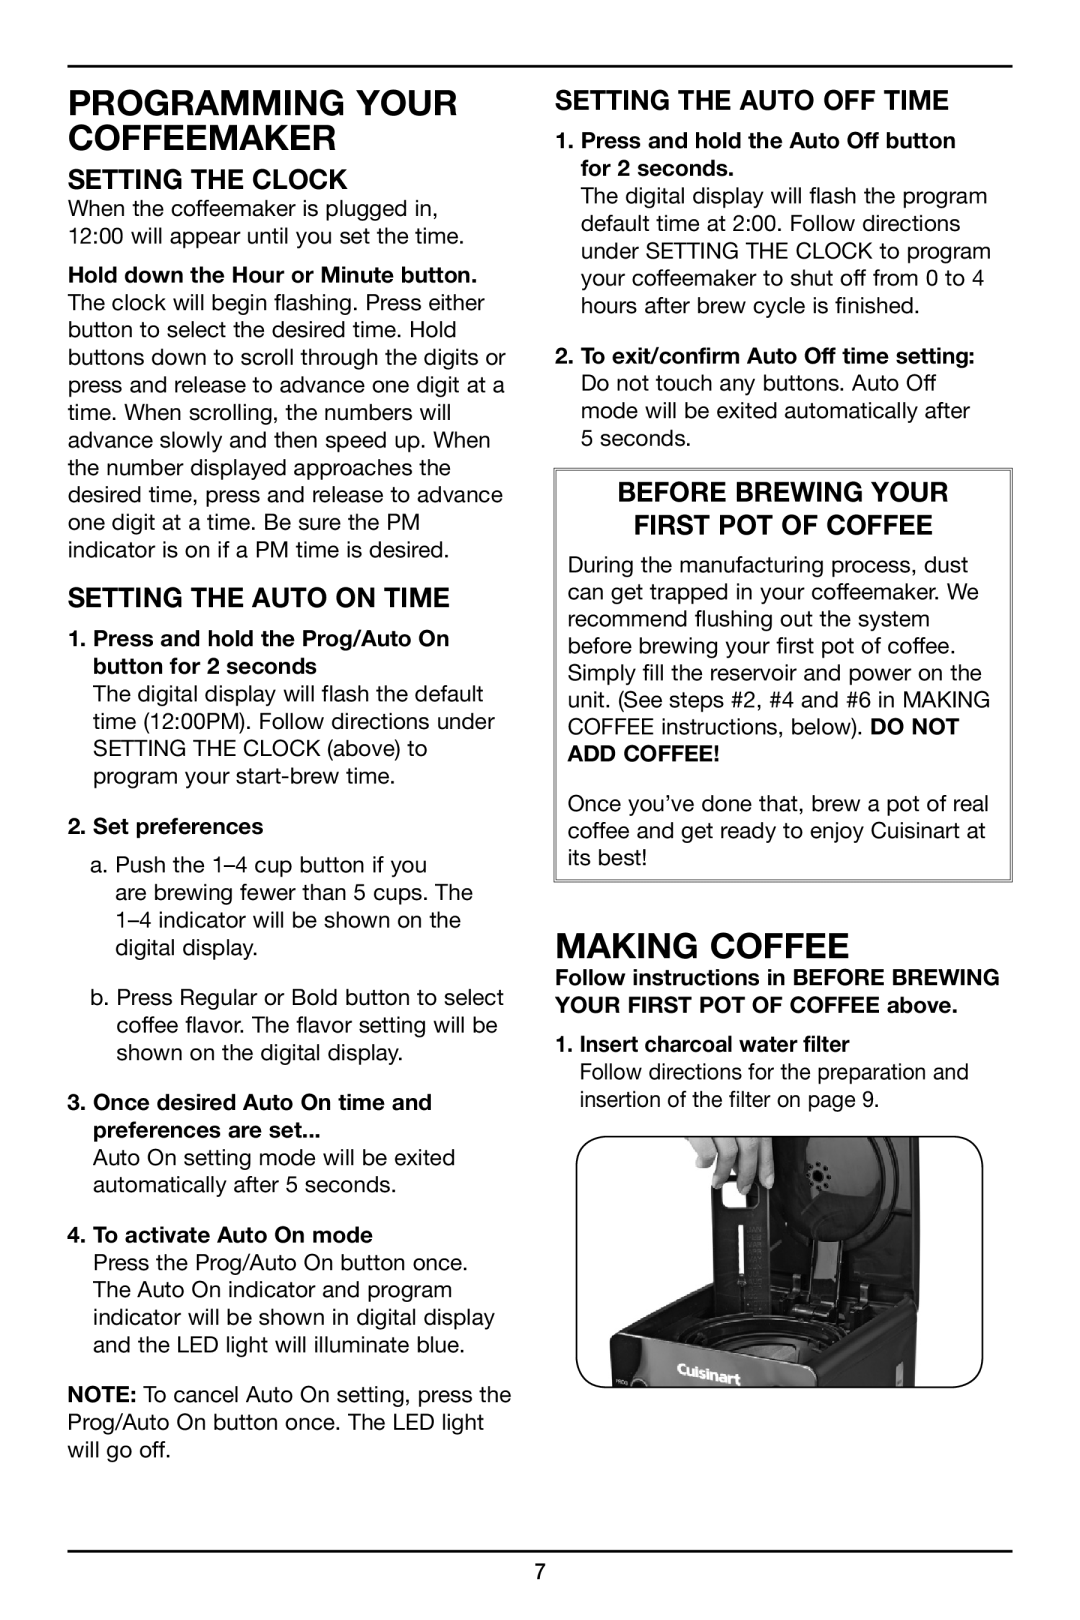 Cuisinart DCC2800, DCC-2800 manual Programming Your Coffeemaker, Making Coffee, Setting the Clock, SETTING THE Auto On TIME 